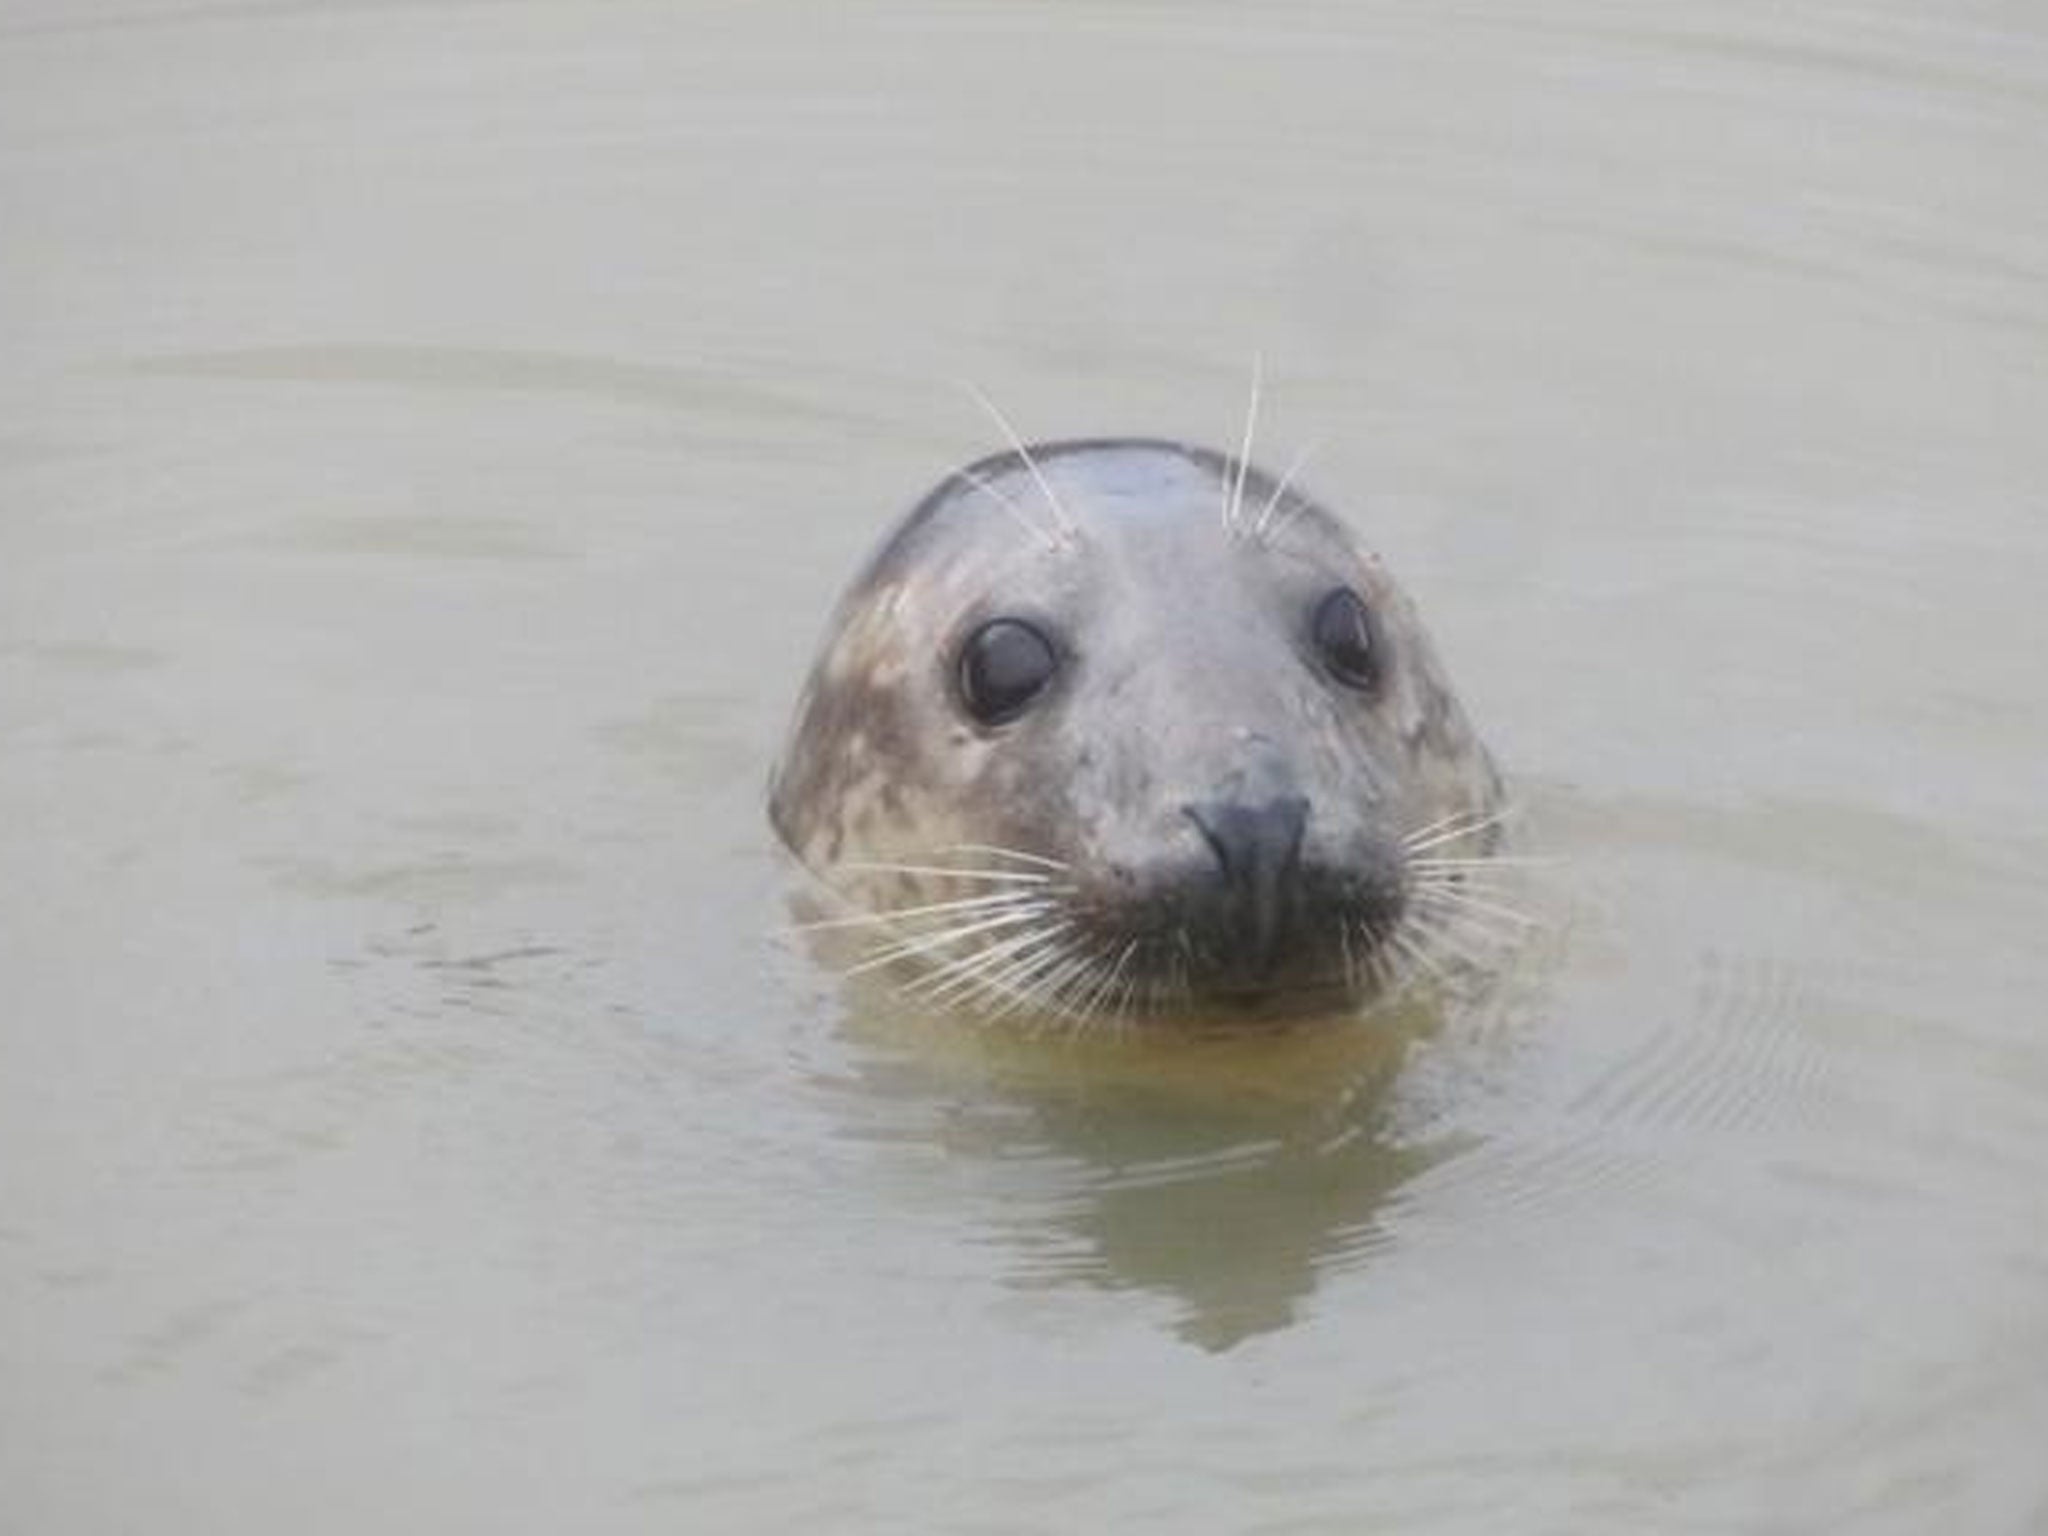 A seal spotted in the River Thames by an RNLI crew member